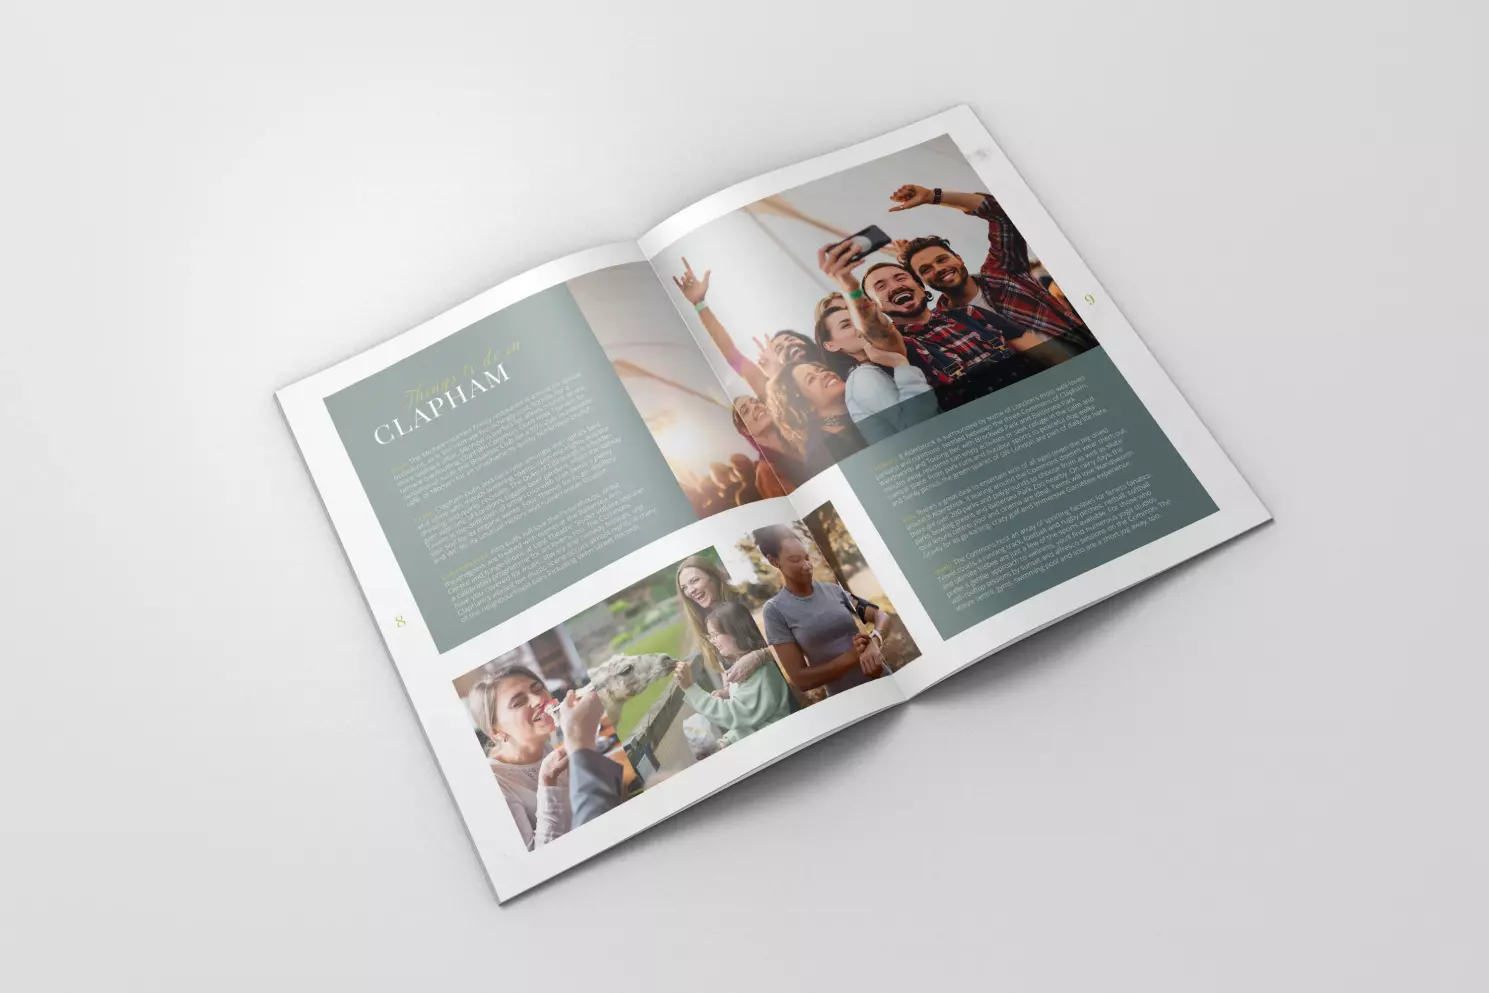 A mock up of a double page spread of the Alderbrook Road brochure showing images of people enjoying several local activities